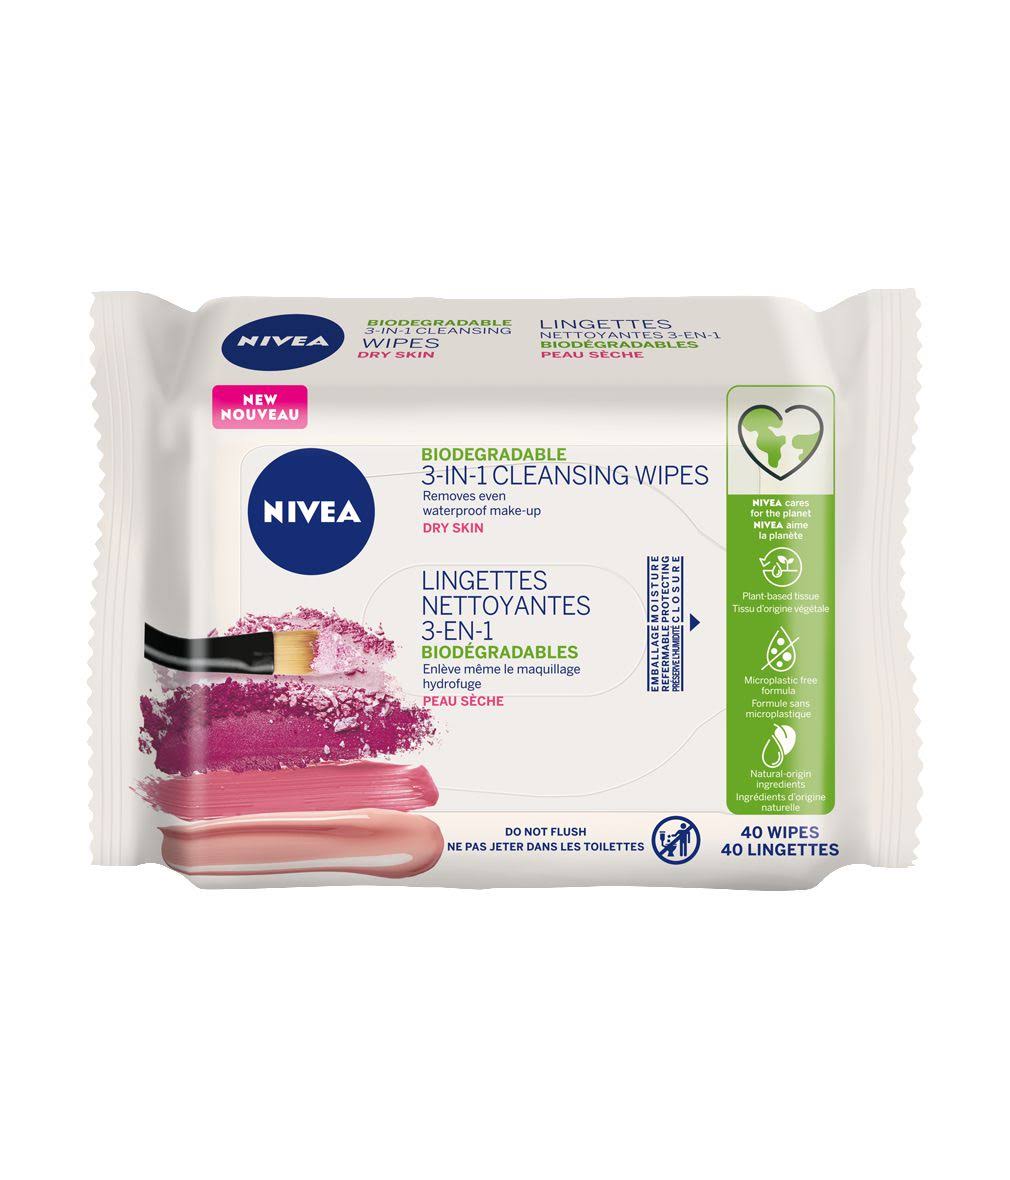 Nivea Biodegradable 3-in-1 Face Cleansing Wipes for Dry Skin